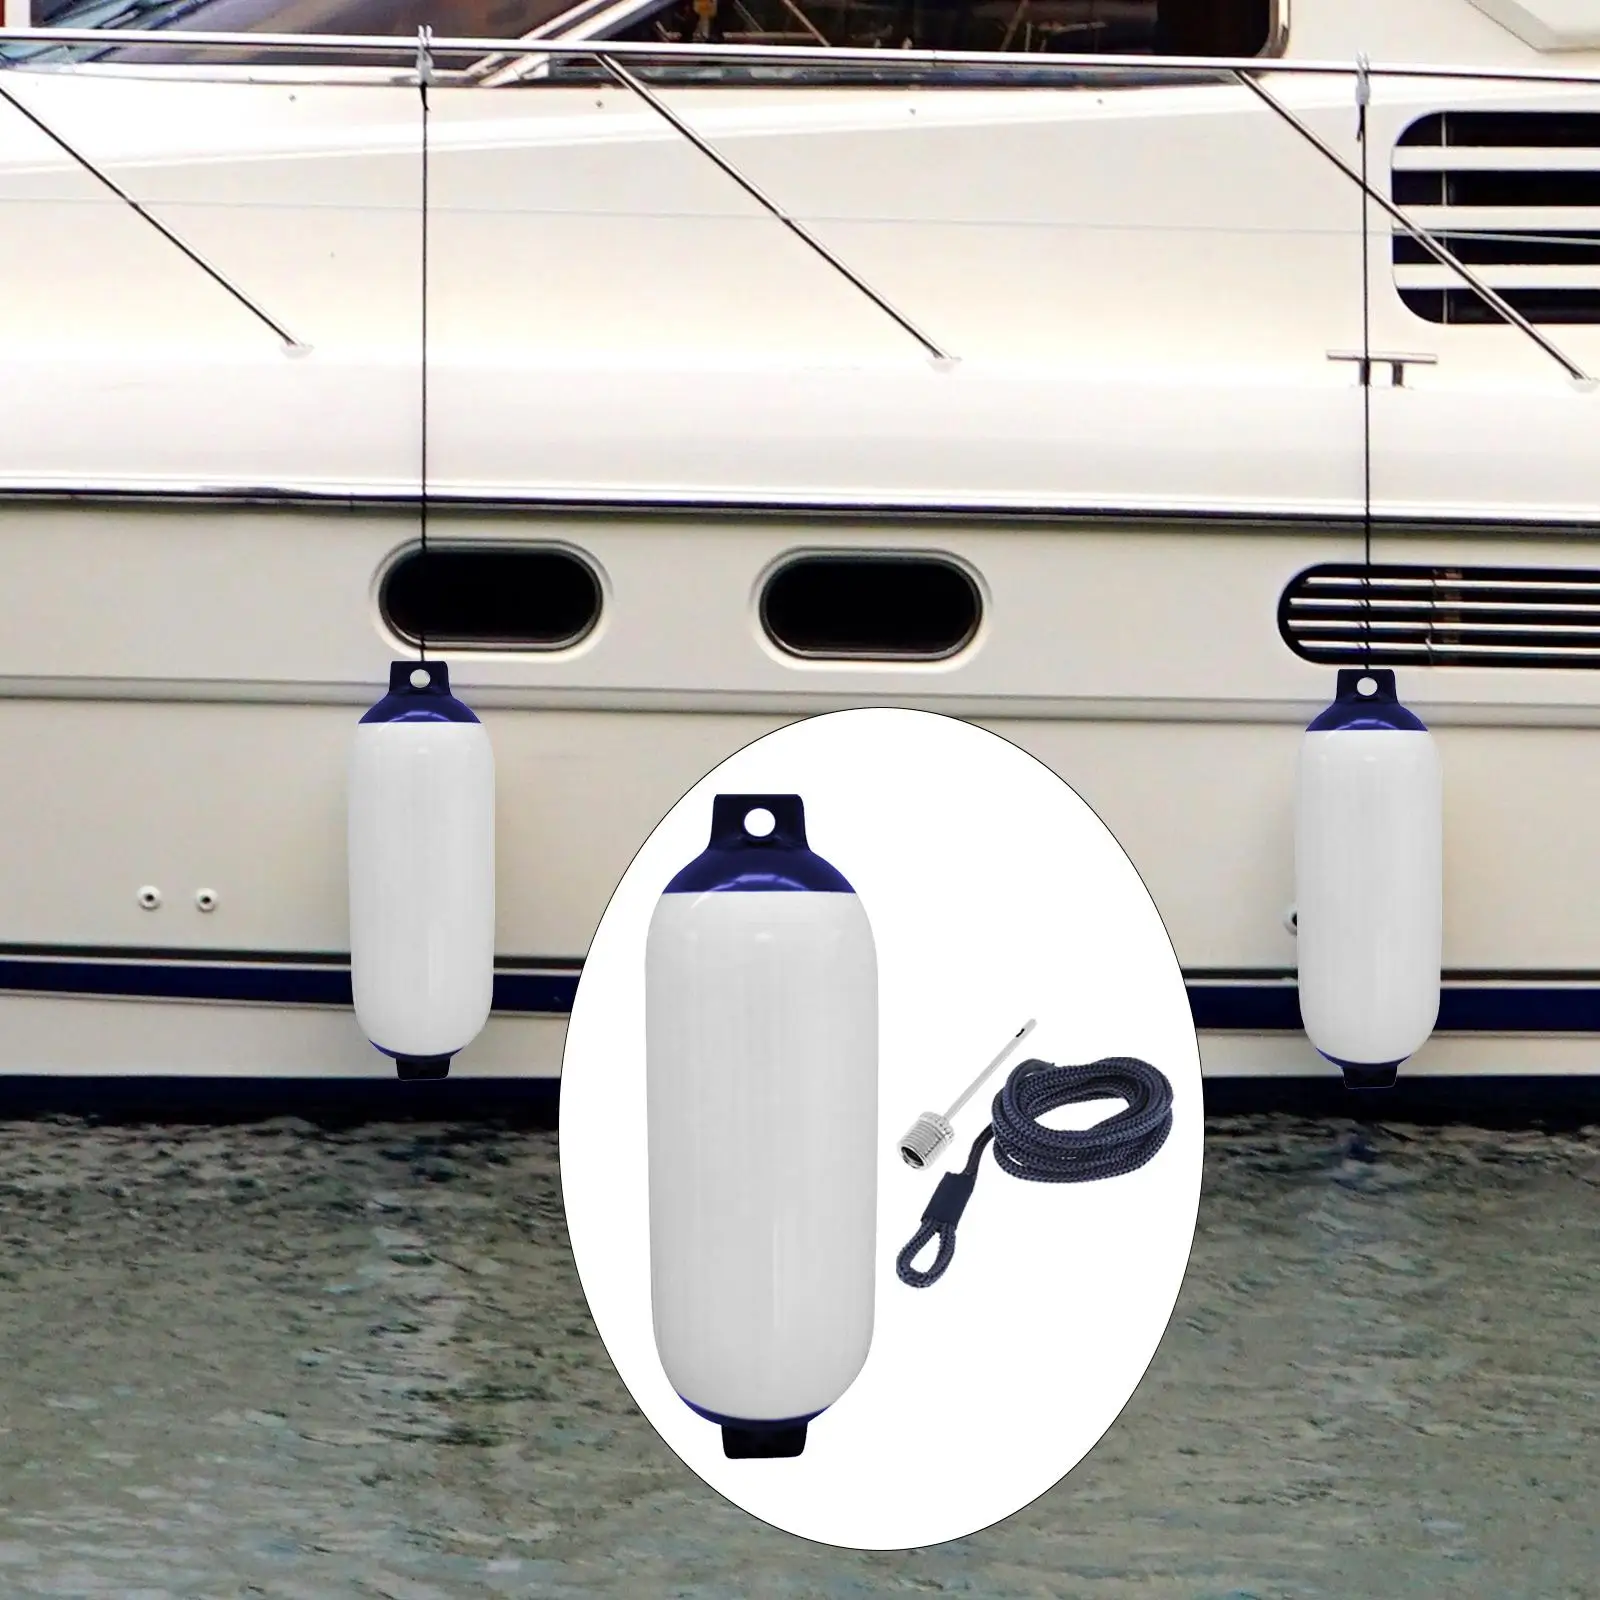 Boat Fender Kit 4x16inch Protector for Docking Fishing Boats Sailboats Boat Fender Protector with Rope and Needle